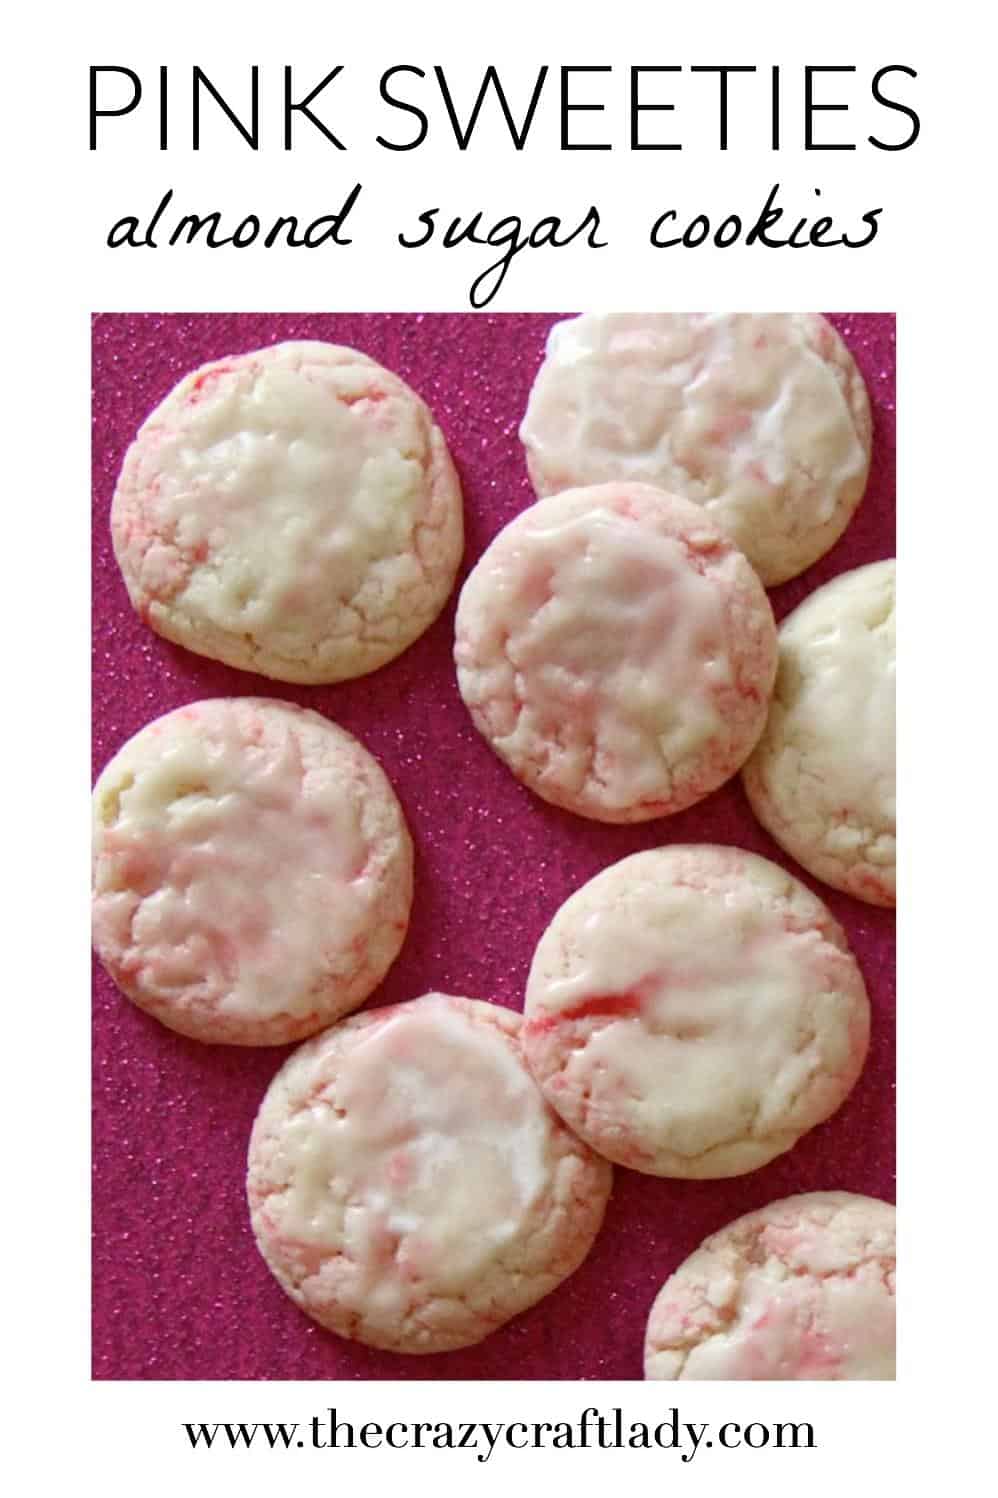  Make no mistake: these pink sweeties are decadent, irresistible, and pretty as a petal.